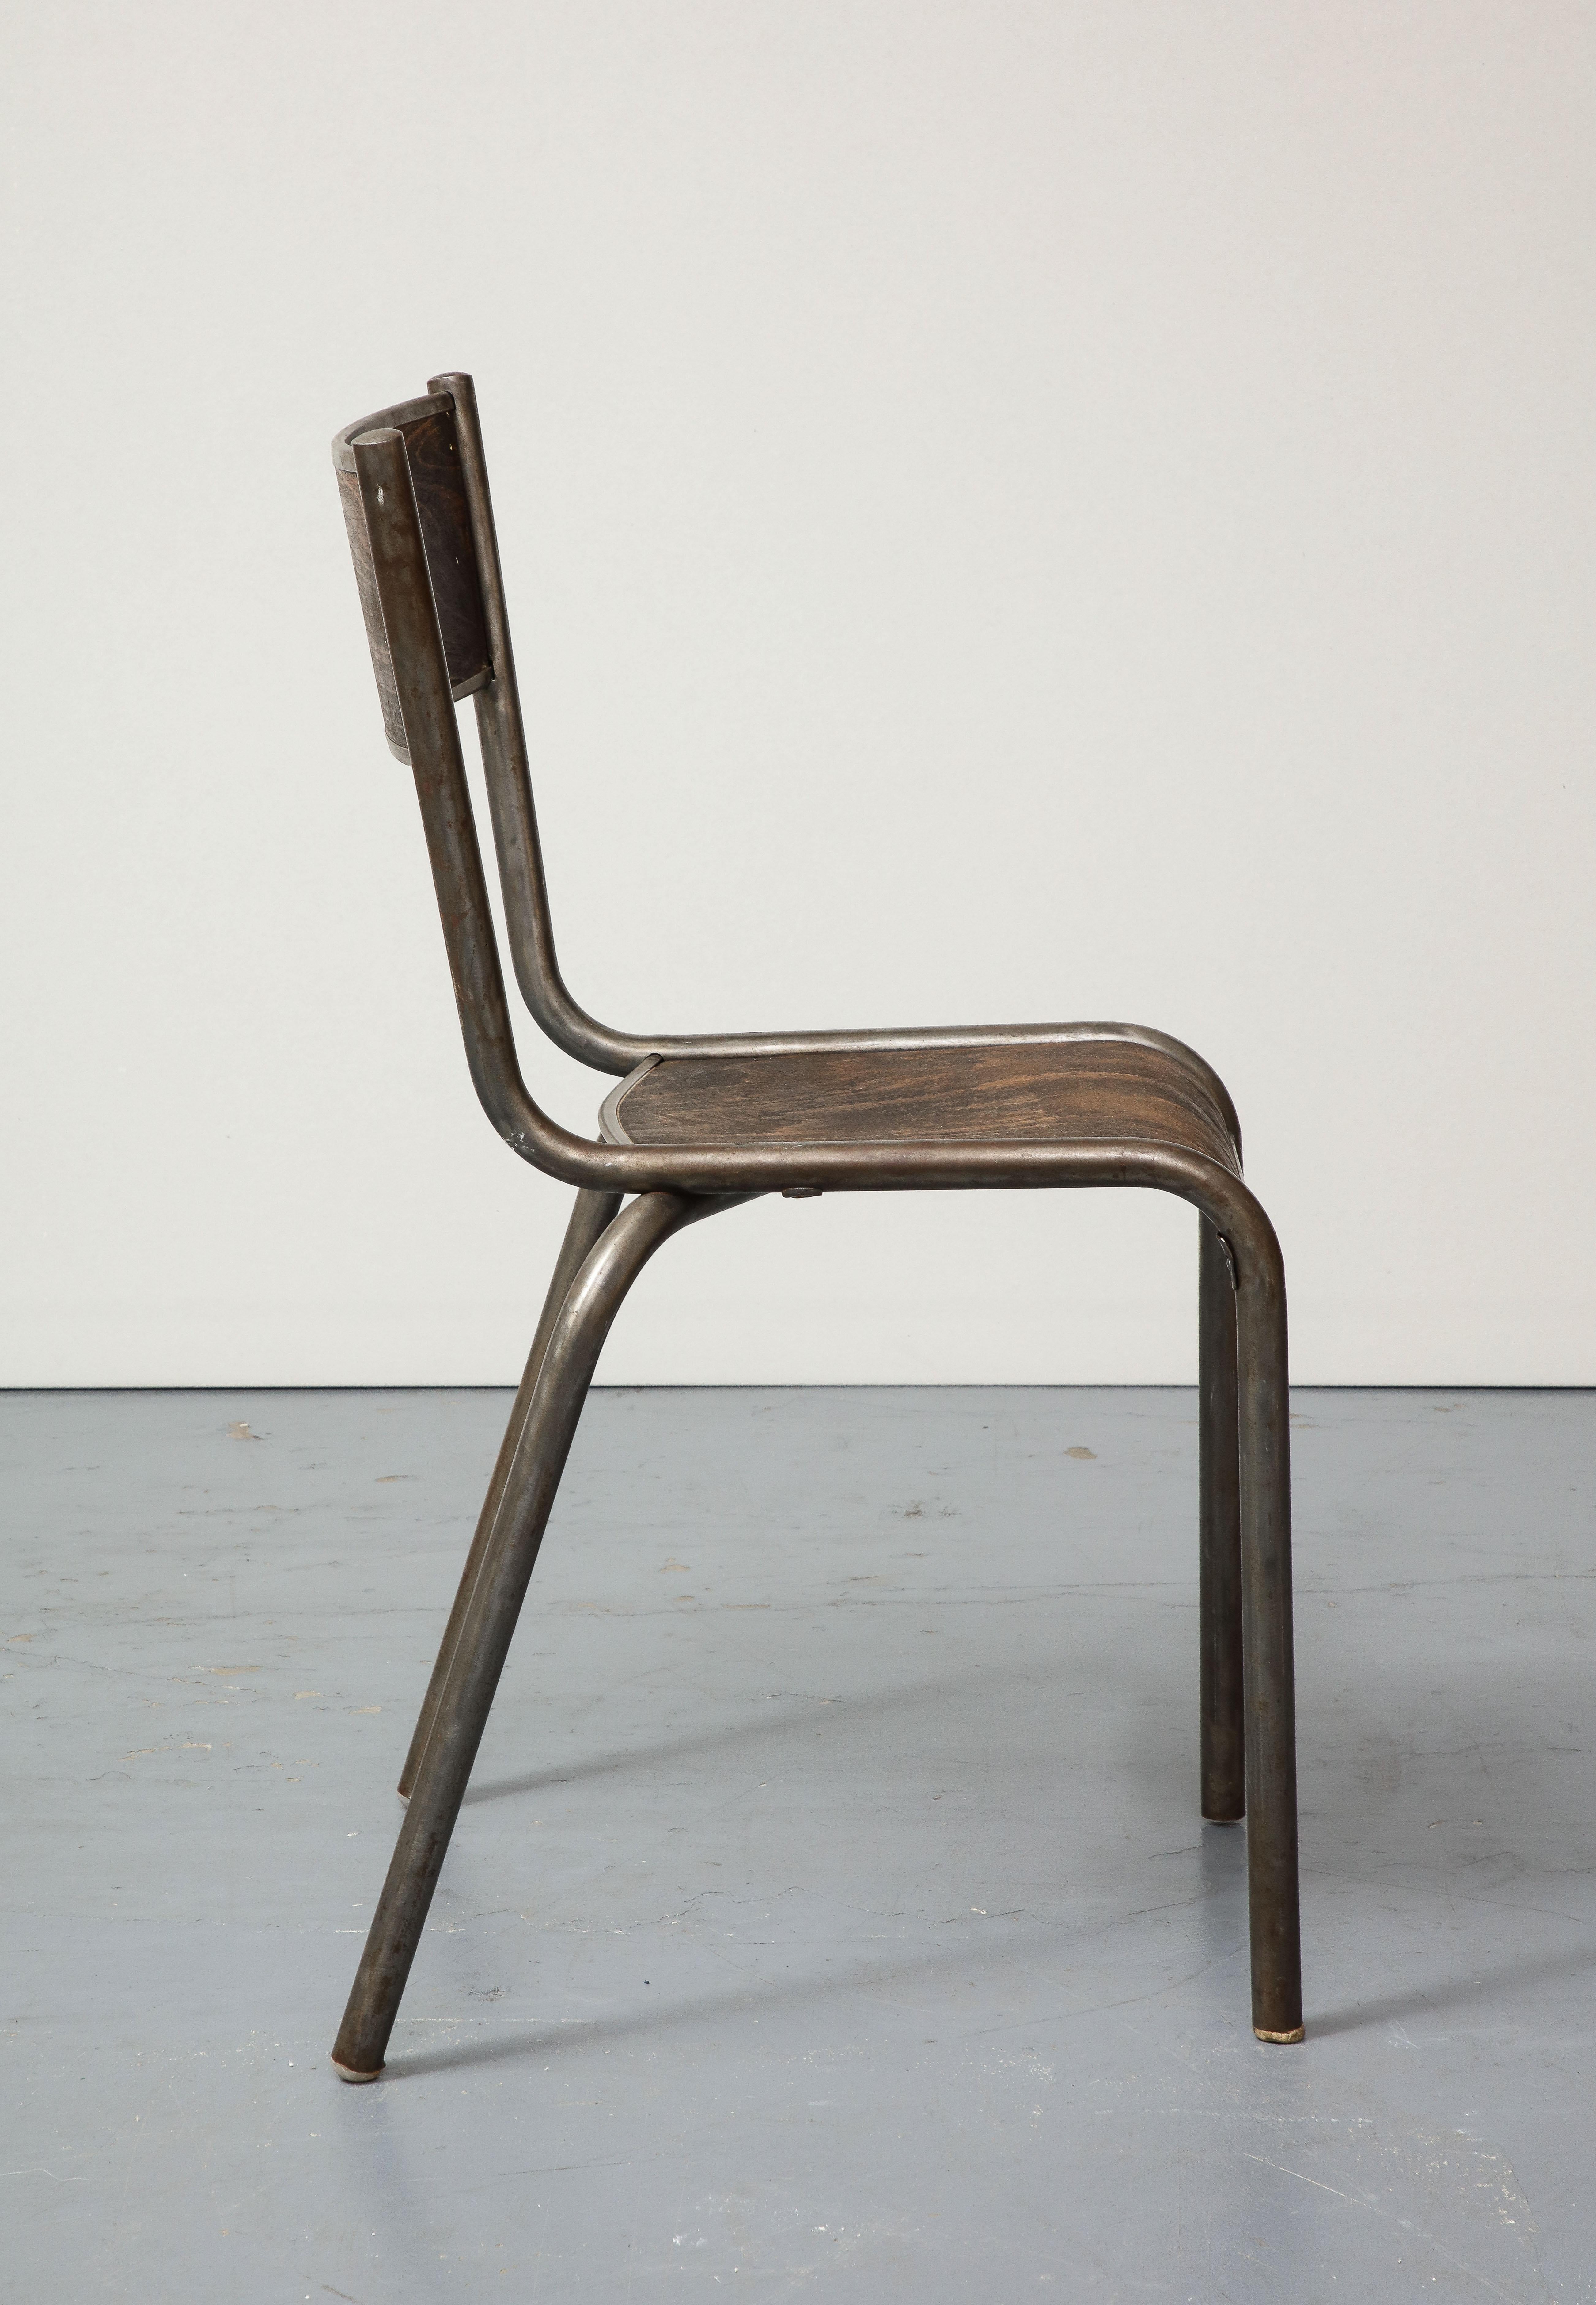 Polished Steel and Bentwood Chair, France, c. 1940 For Sale 3